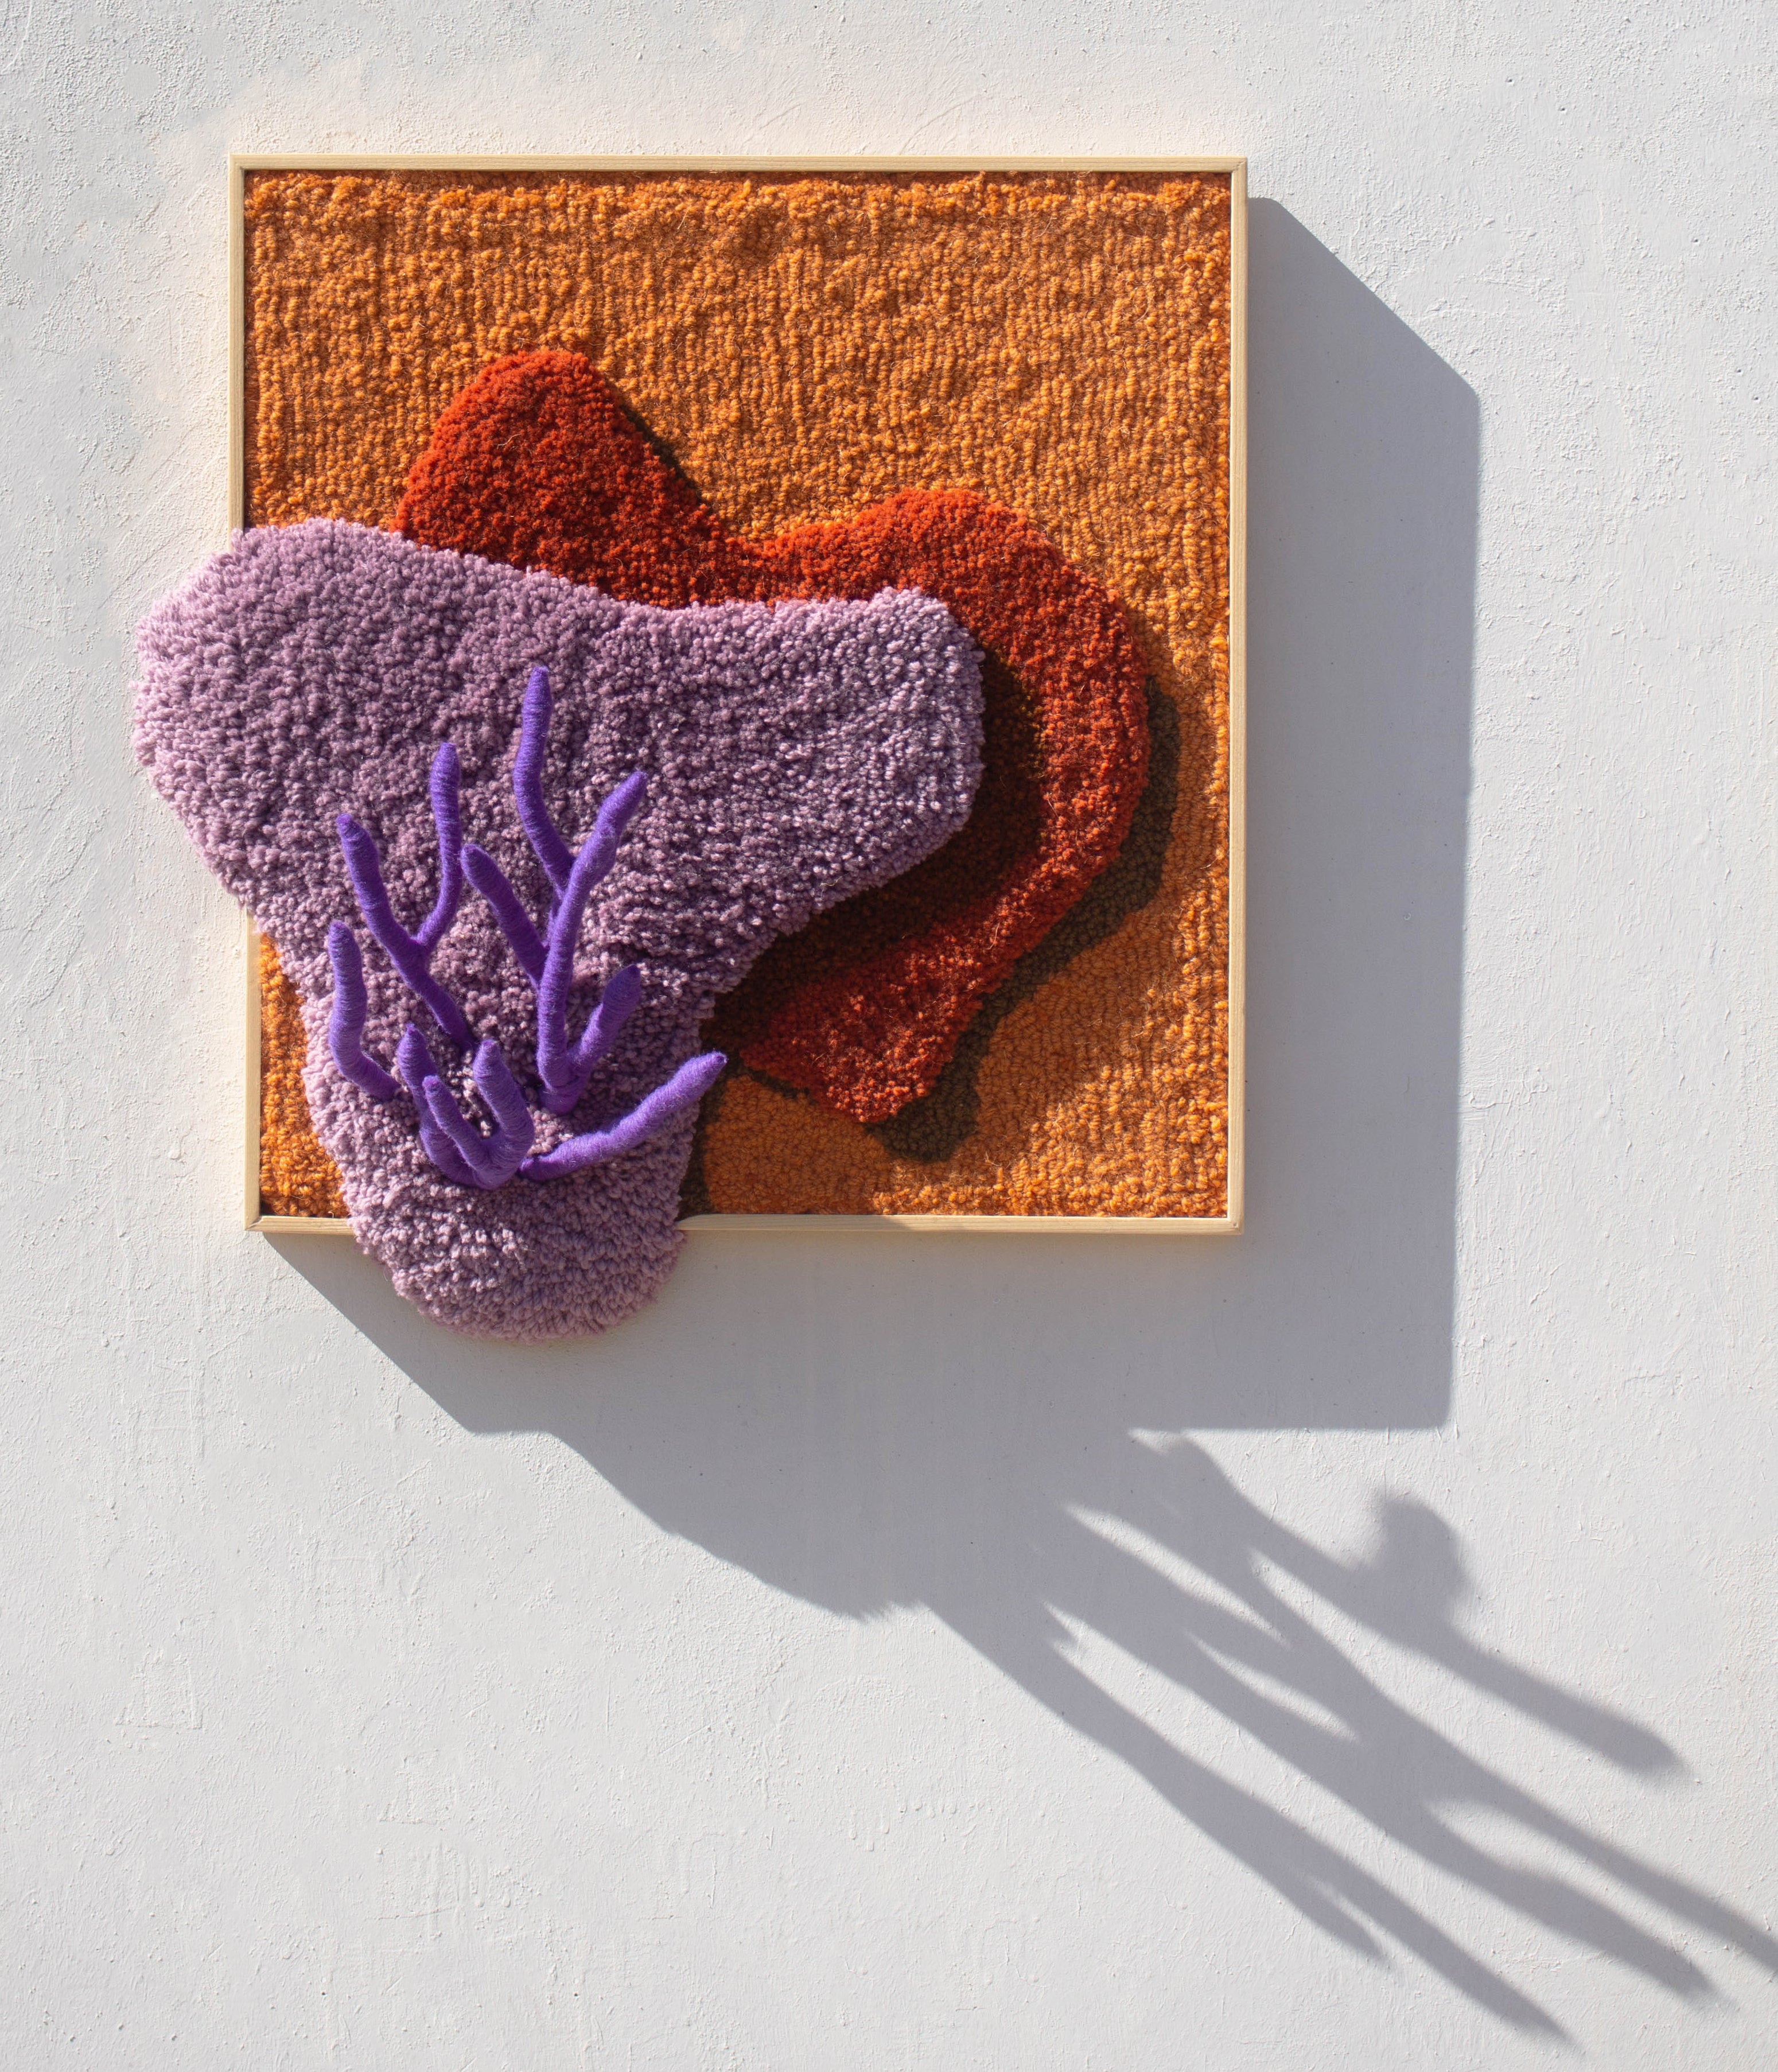 Handmade Contemporary Wall Tapestry with Textile Sculpture, Fiber Art by OHXOJA For Sale